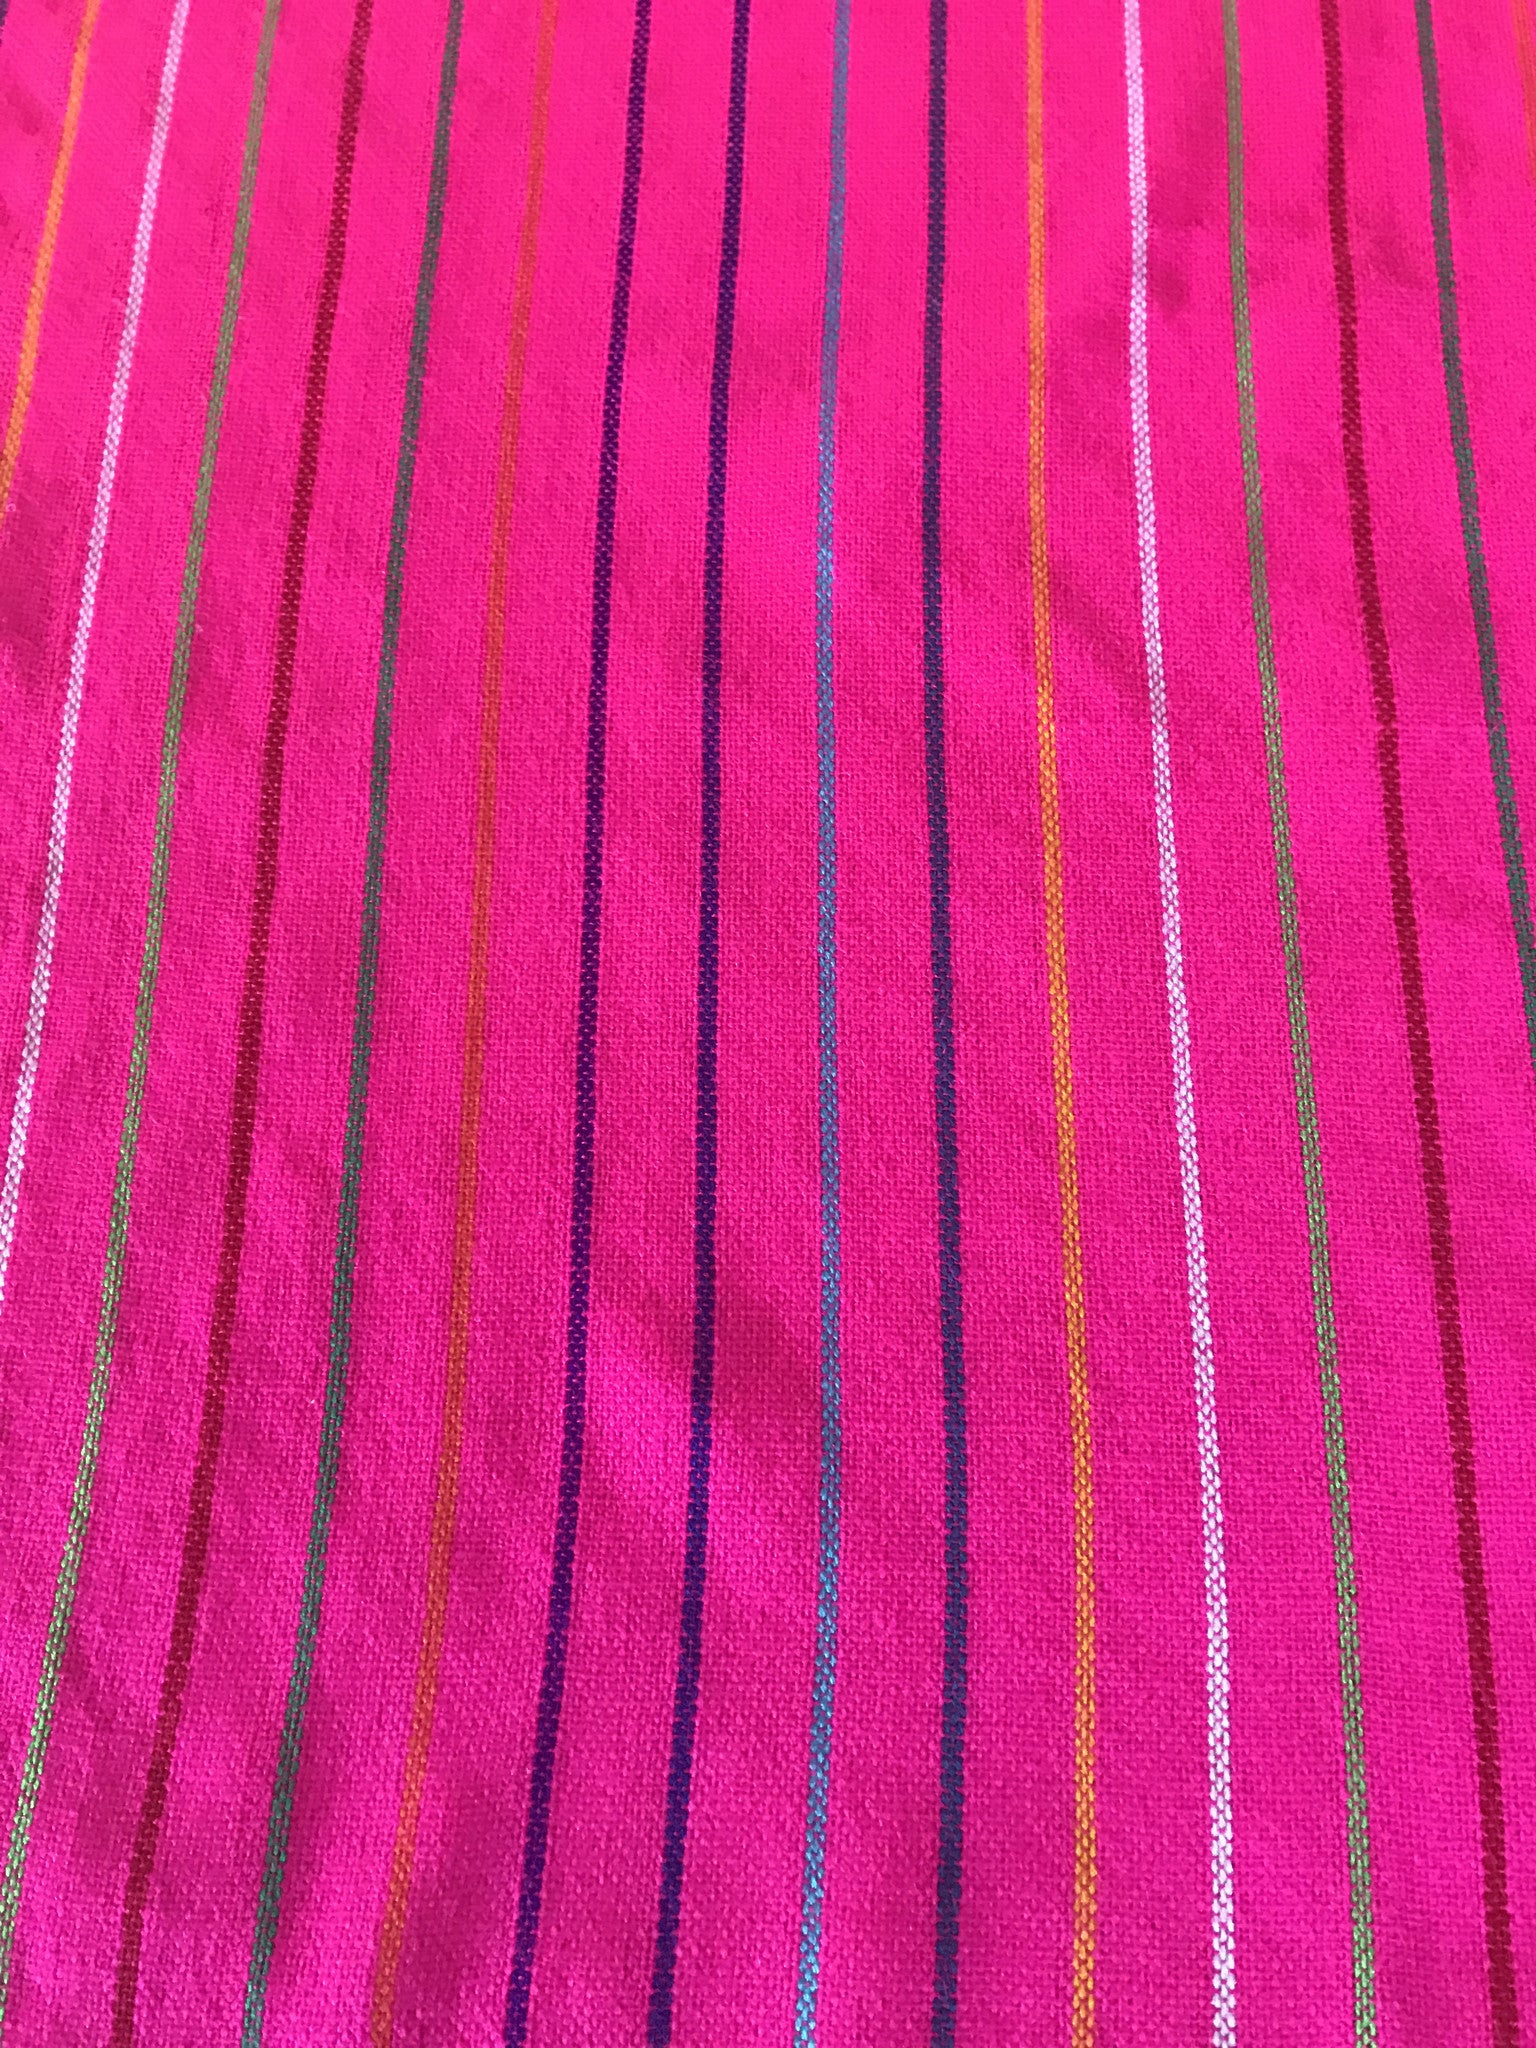 Mexican fabric Table Runner Colorful Pink stripes - MesaChic - 5